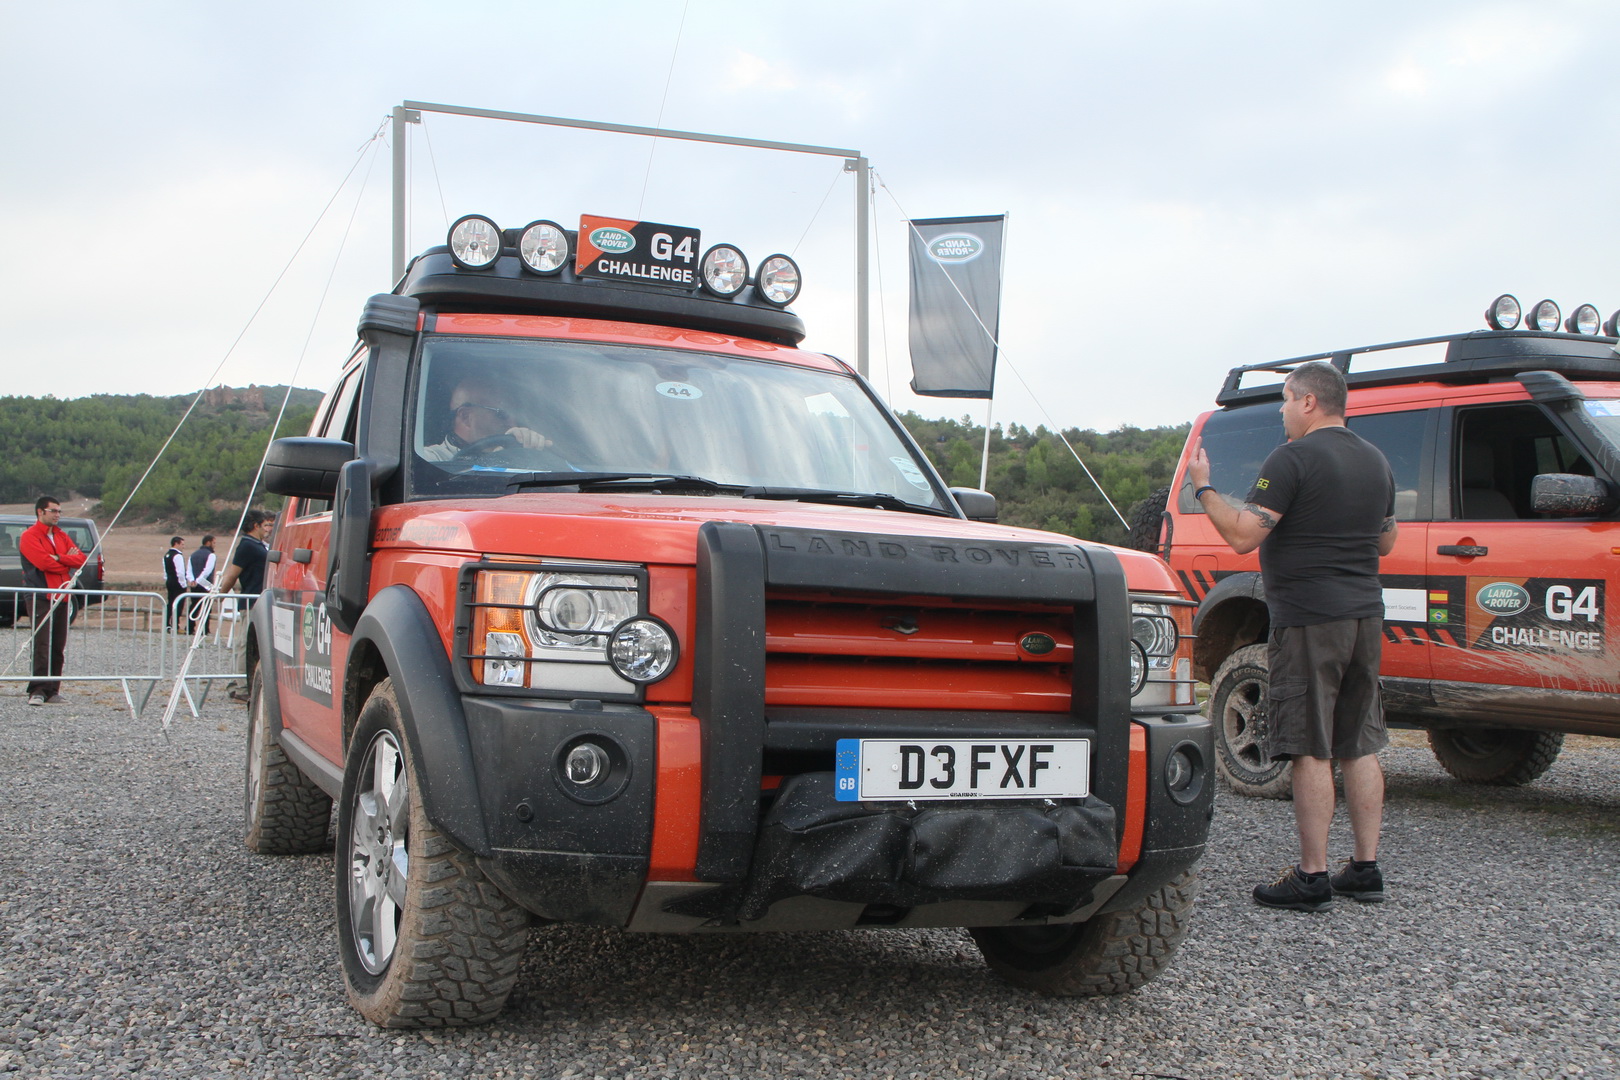 Land_Rover_Party_2015 (72)